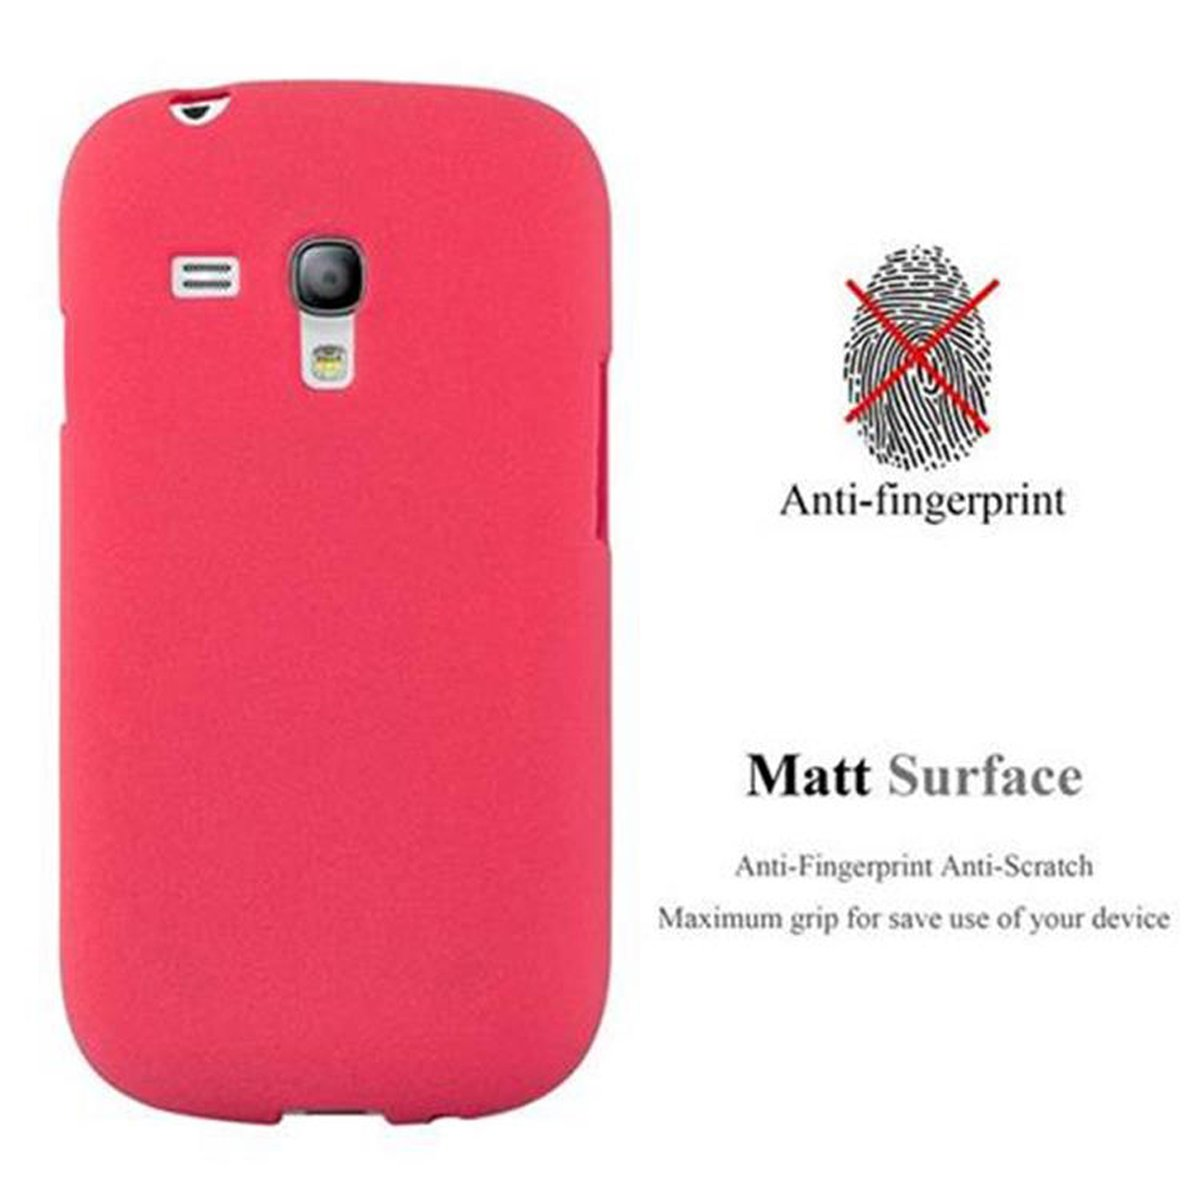 S3 Galaxy Samsung, Frosted Schutzhülle, MINI, TPU CADORABO ROT Backcover, FROST